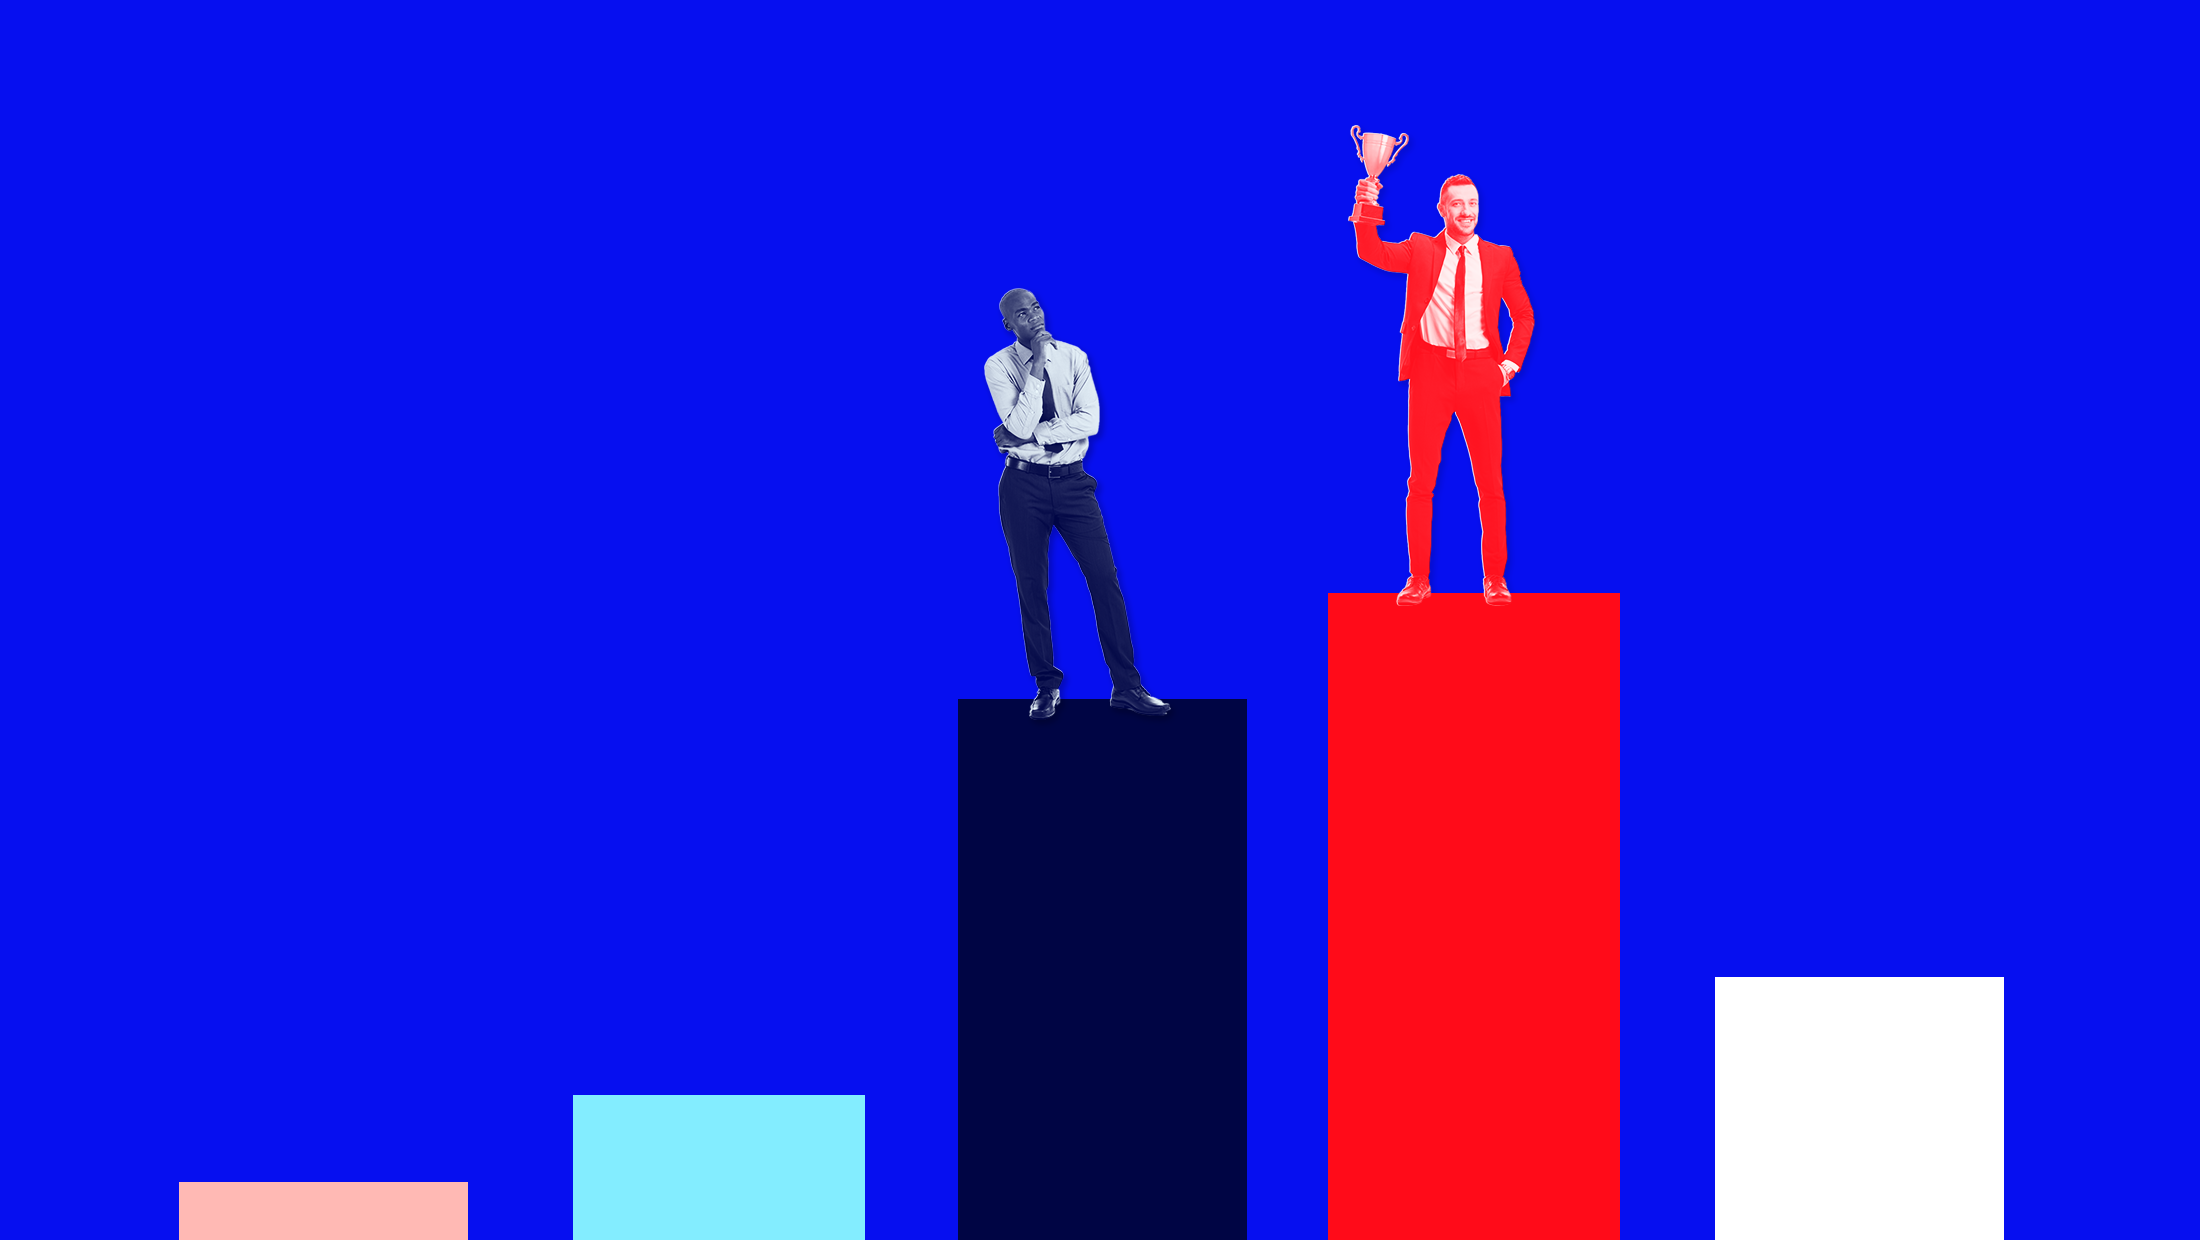 A multicolored bar graph on a blue background, with a white candidate standing atop the tallest bar holding a trophy and a Black candidate standing atop the second tallest bar.